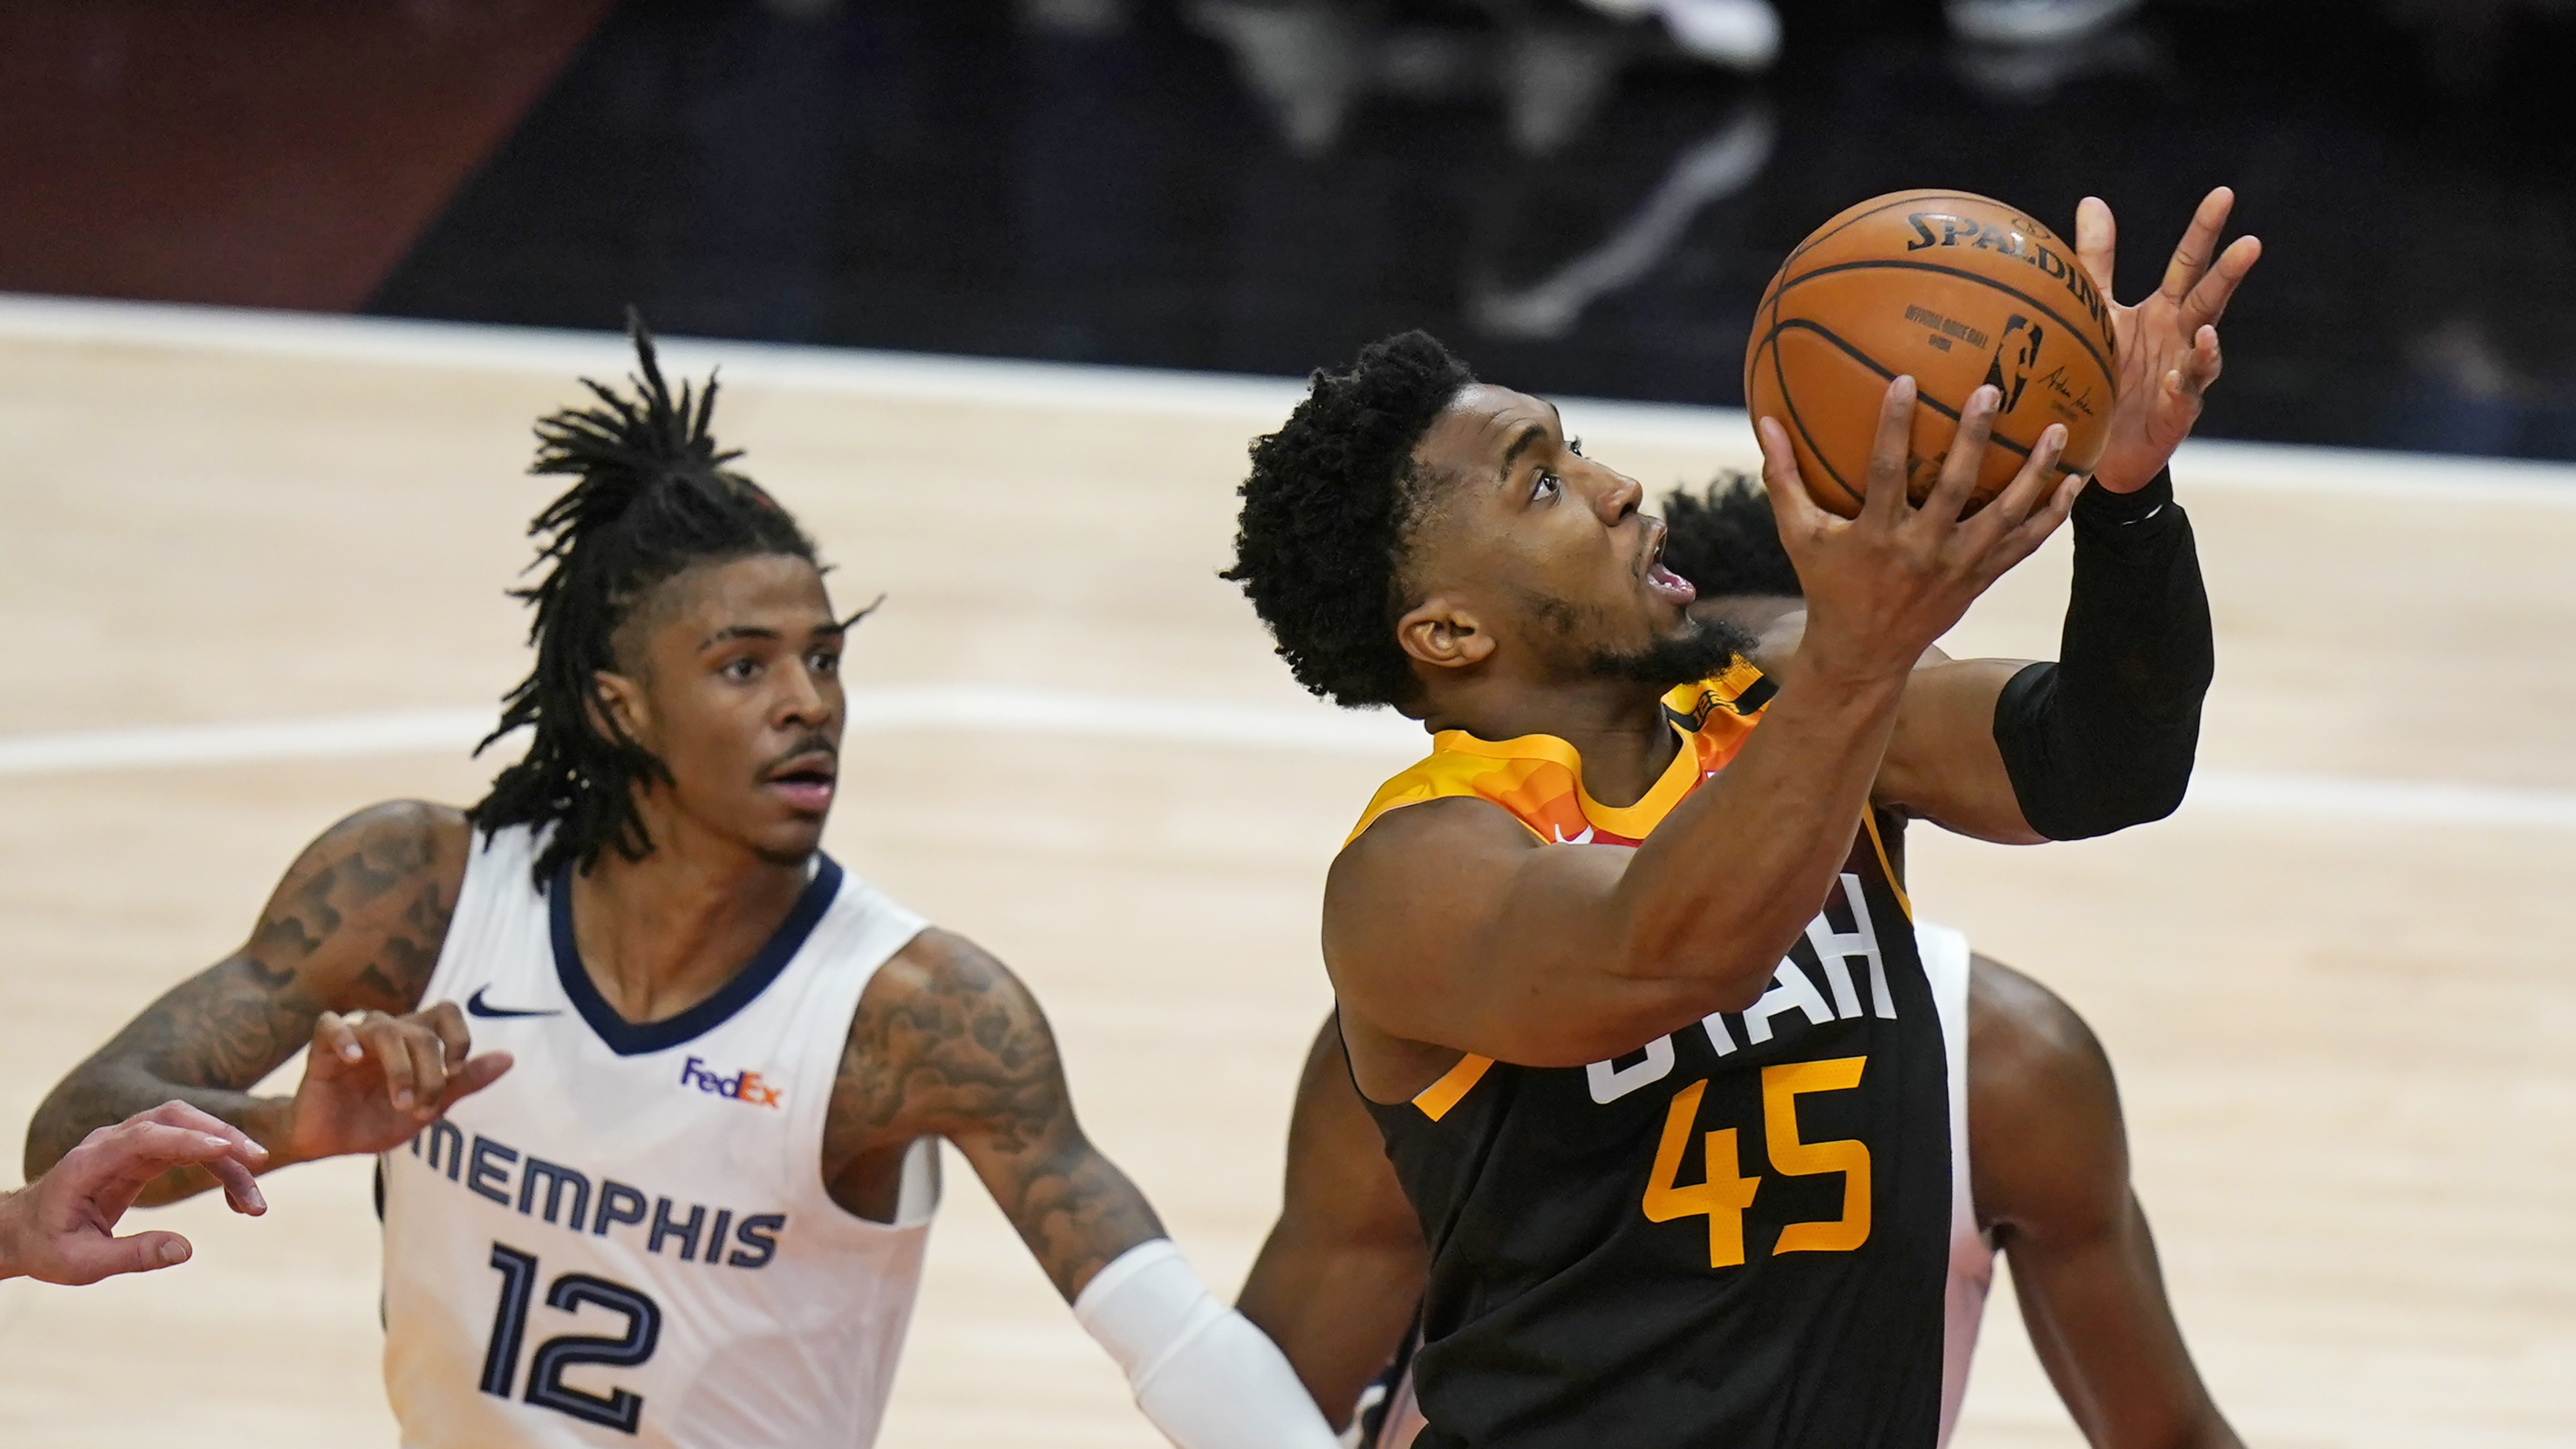 Utah Jazz vs Memphis Grizzlies free live stream, Game 3 score, odds, time, TV channel, how to watch NBA playoffs online (5/29/21)